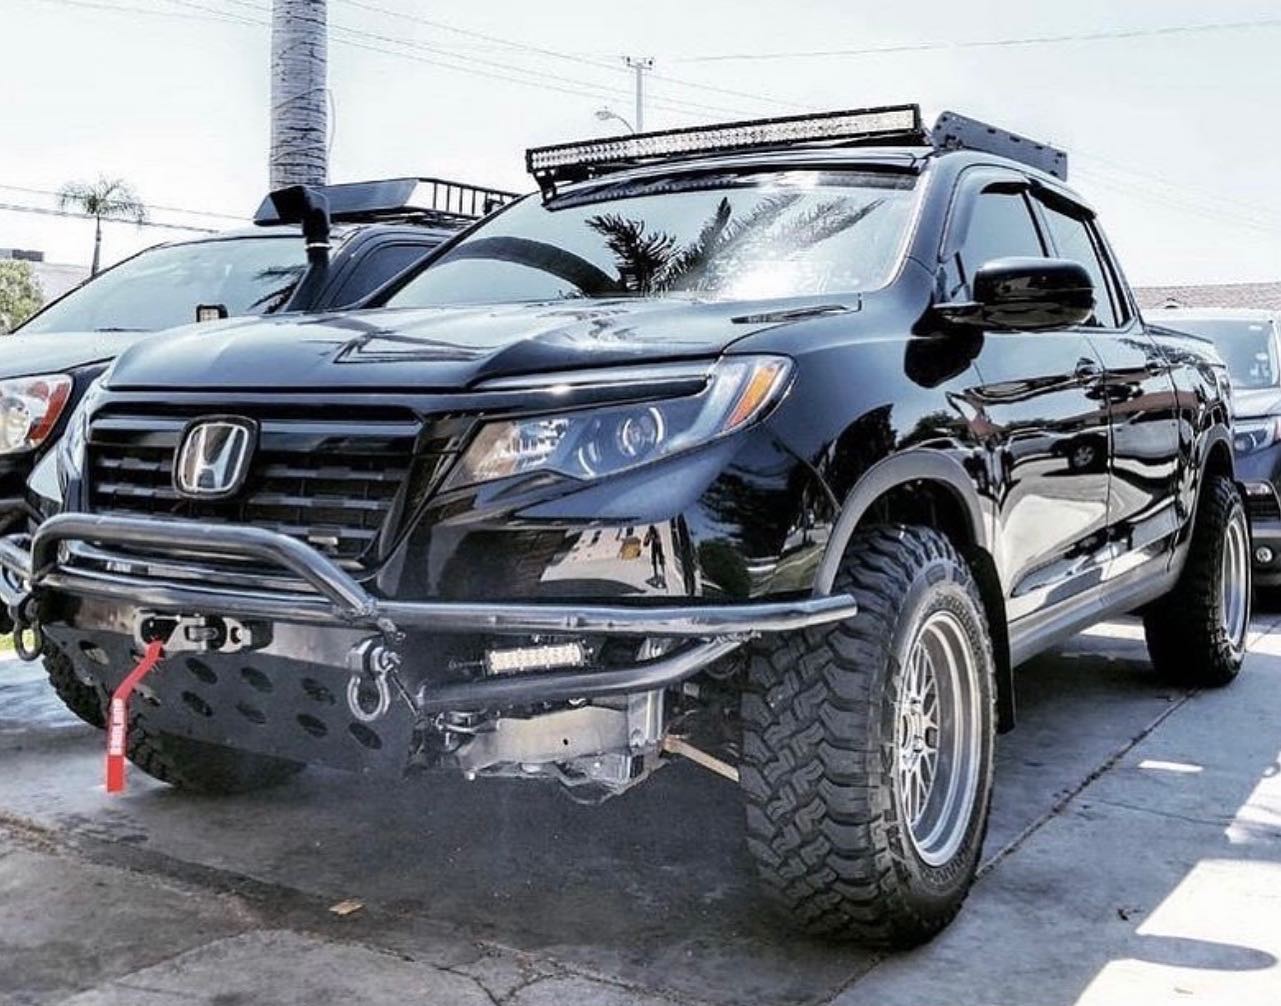 2nd generation Honda Ridgeline Prerunner off road build with steel bumper and long travel suspension